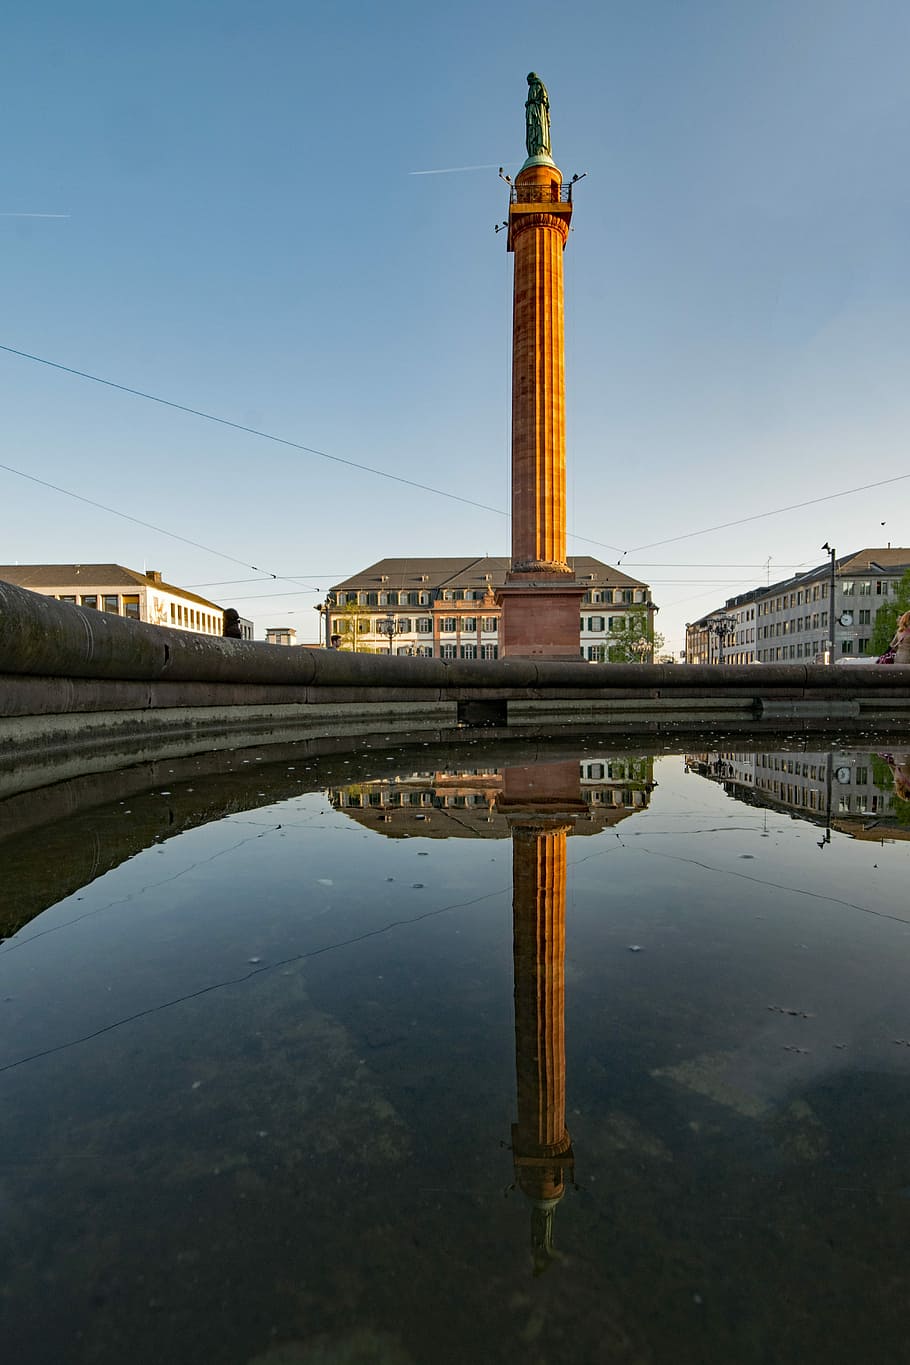 Darmstadt, Hesse, Germany, luisenplatz, places of interest, long lui, ludwig, water, reflection, fountain